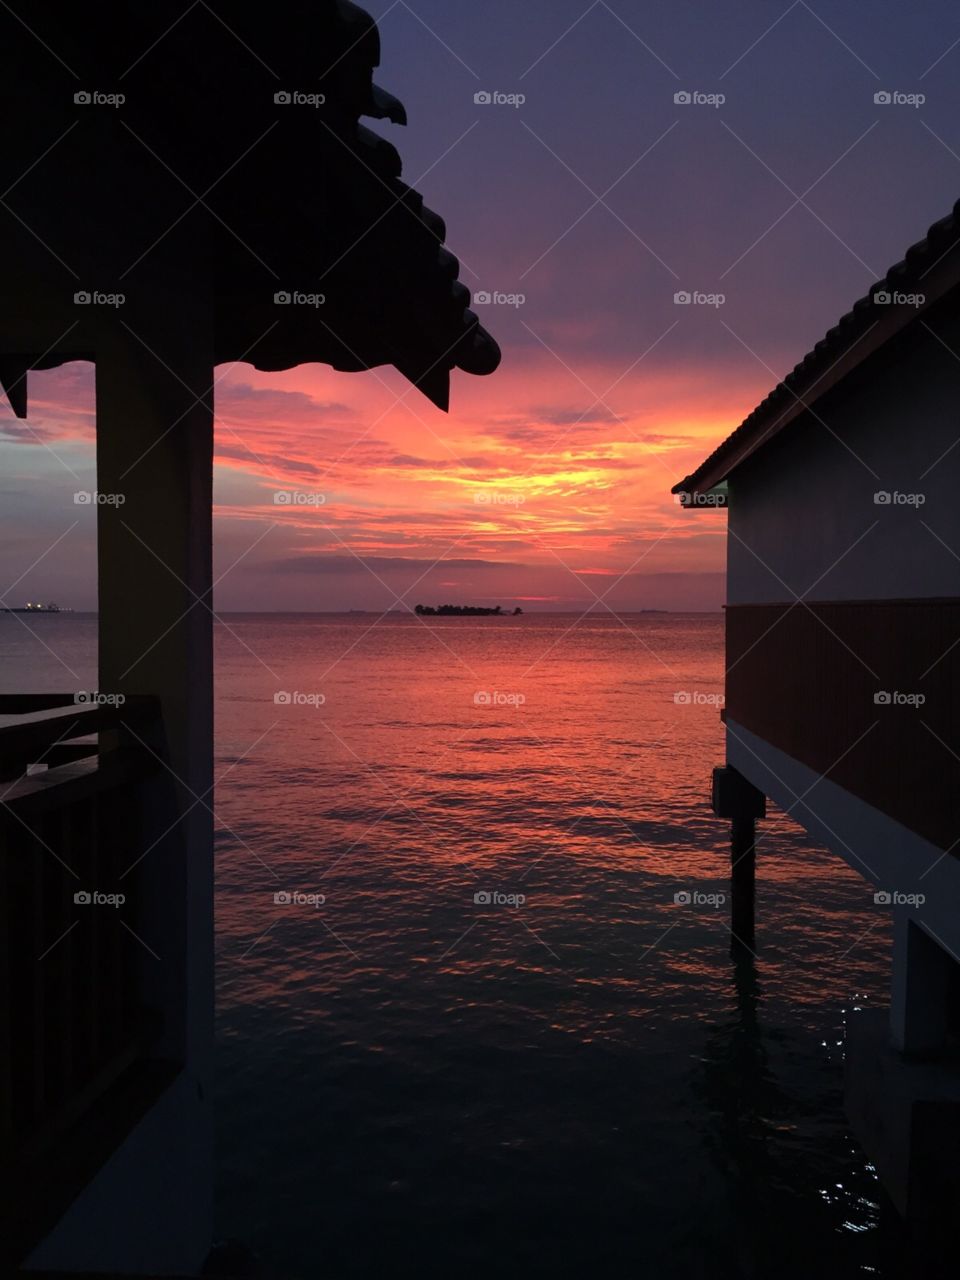 Sunset over the Malacca Strait. Happened to be strolling back from the pool when the sky suddenly took on this beautiful reddish hue. No photoshop. 